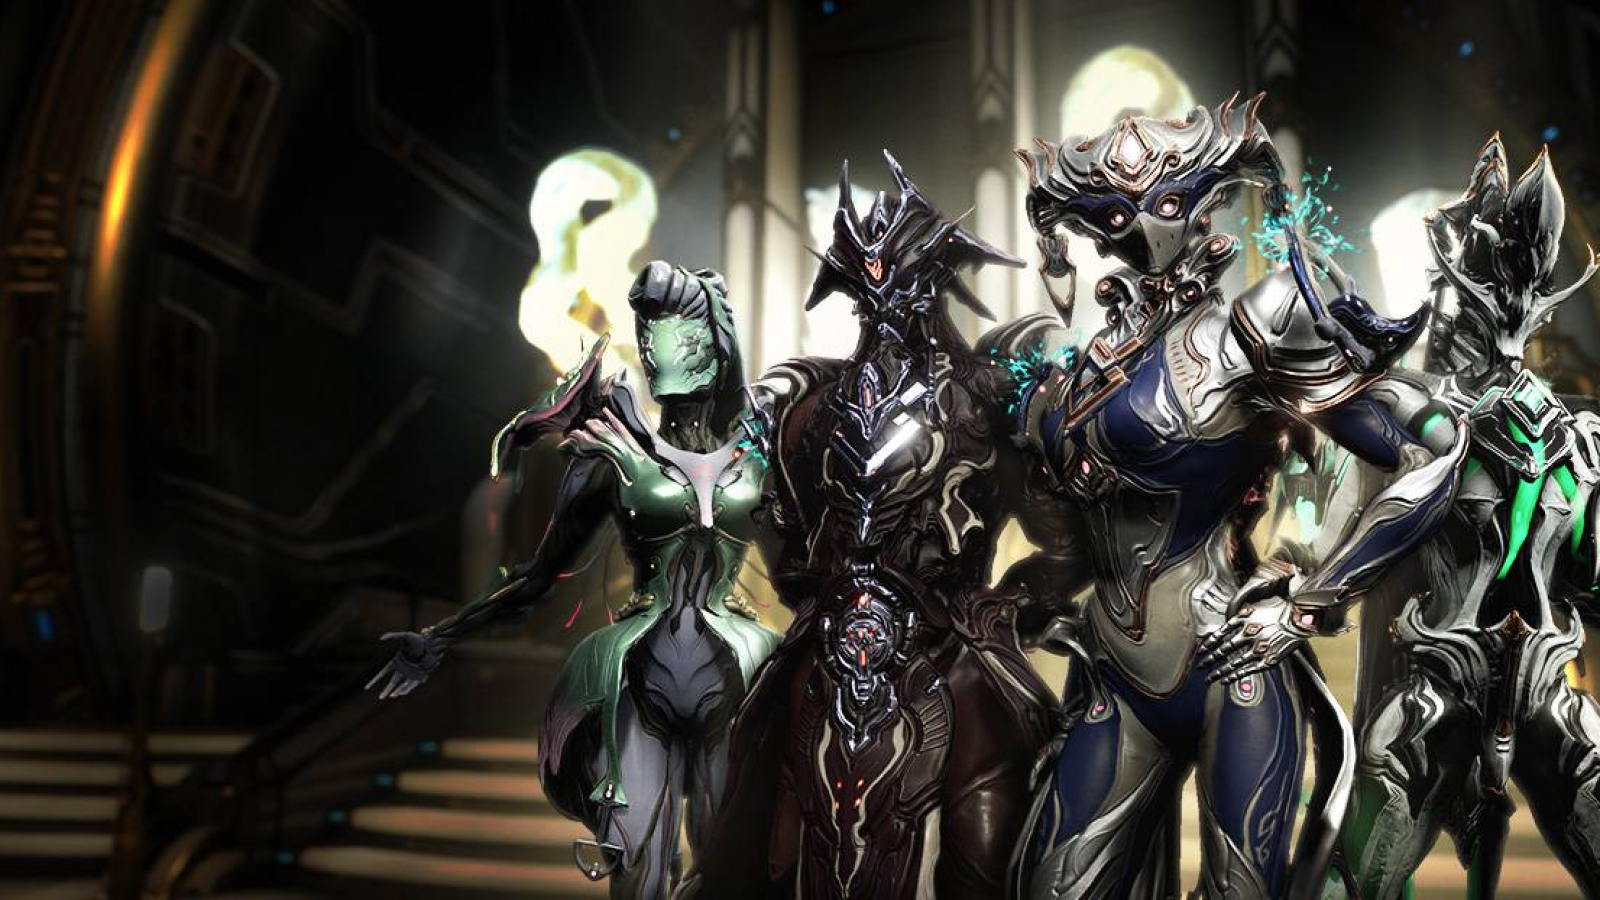 Fashion Frame: Not Just End Game